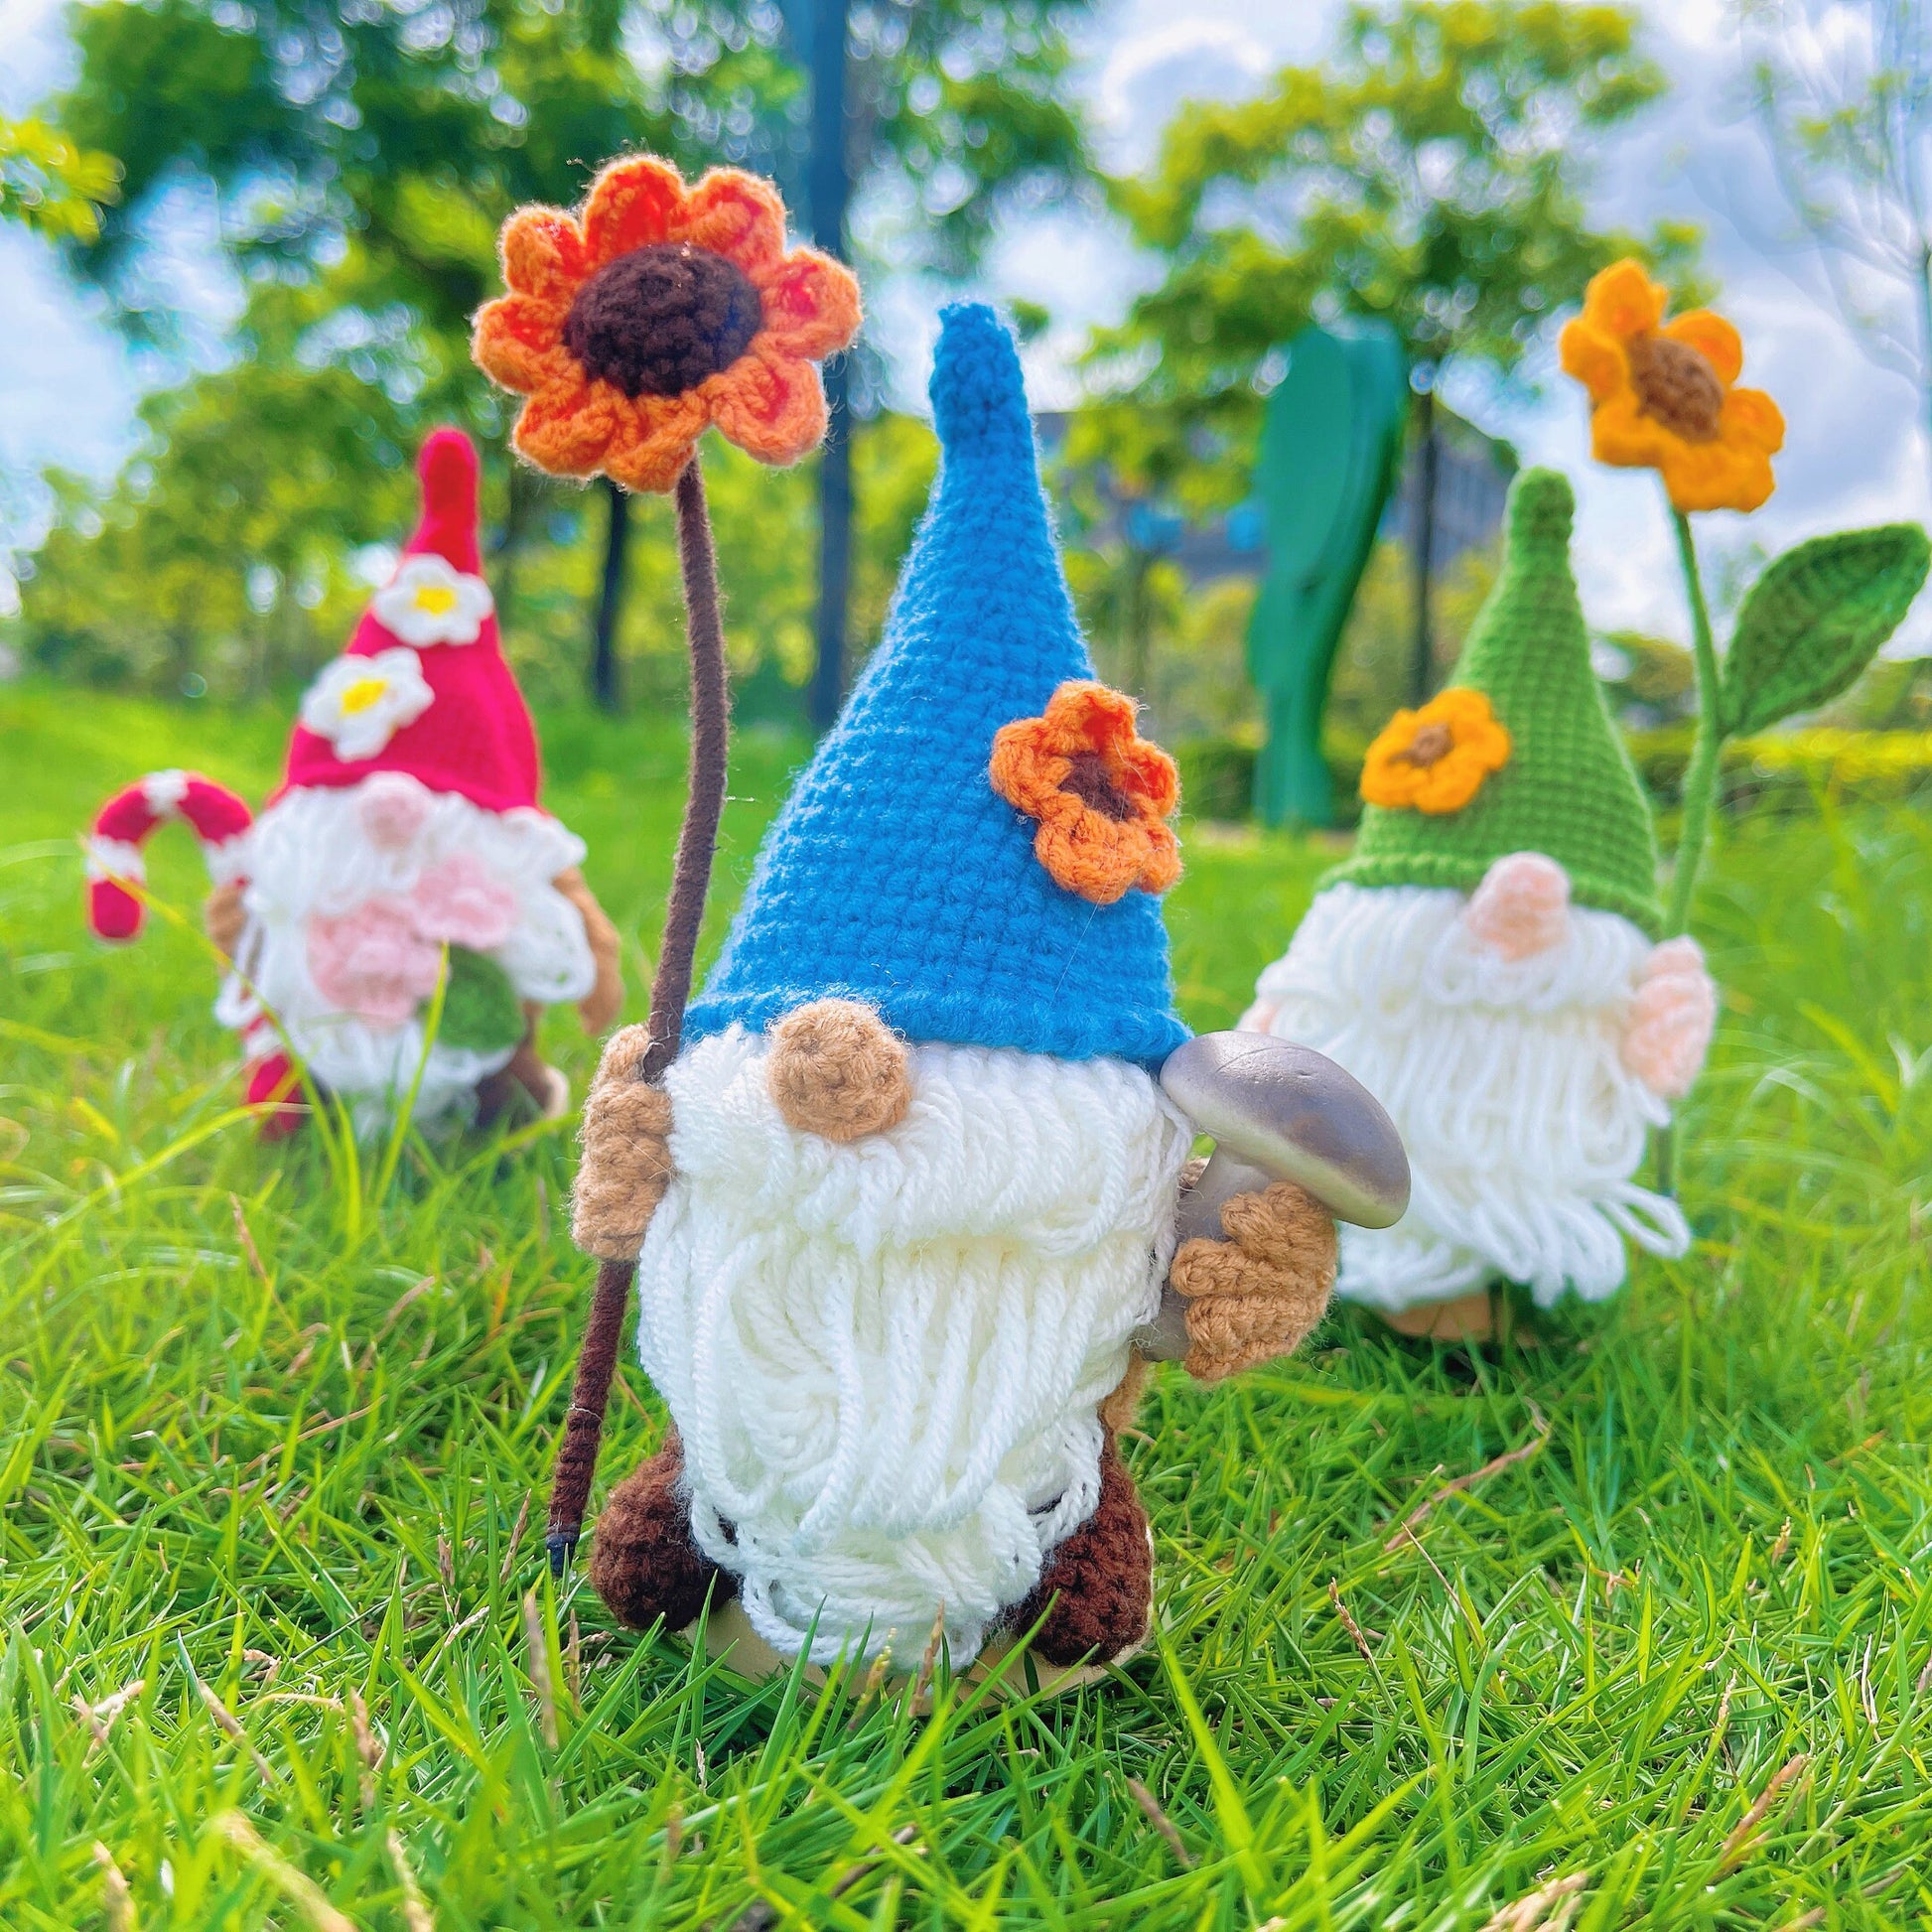 Handmade Crochet Gnomes with Stand for Decor Gifts - Nordic Figurines with Adorable Design, Perfect for Christmas, Holidays and Collector